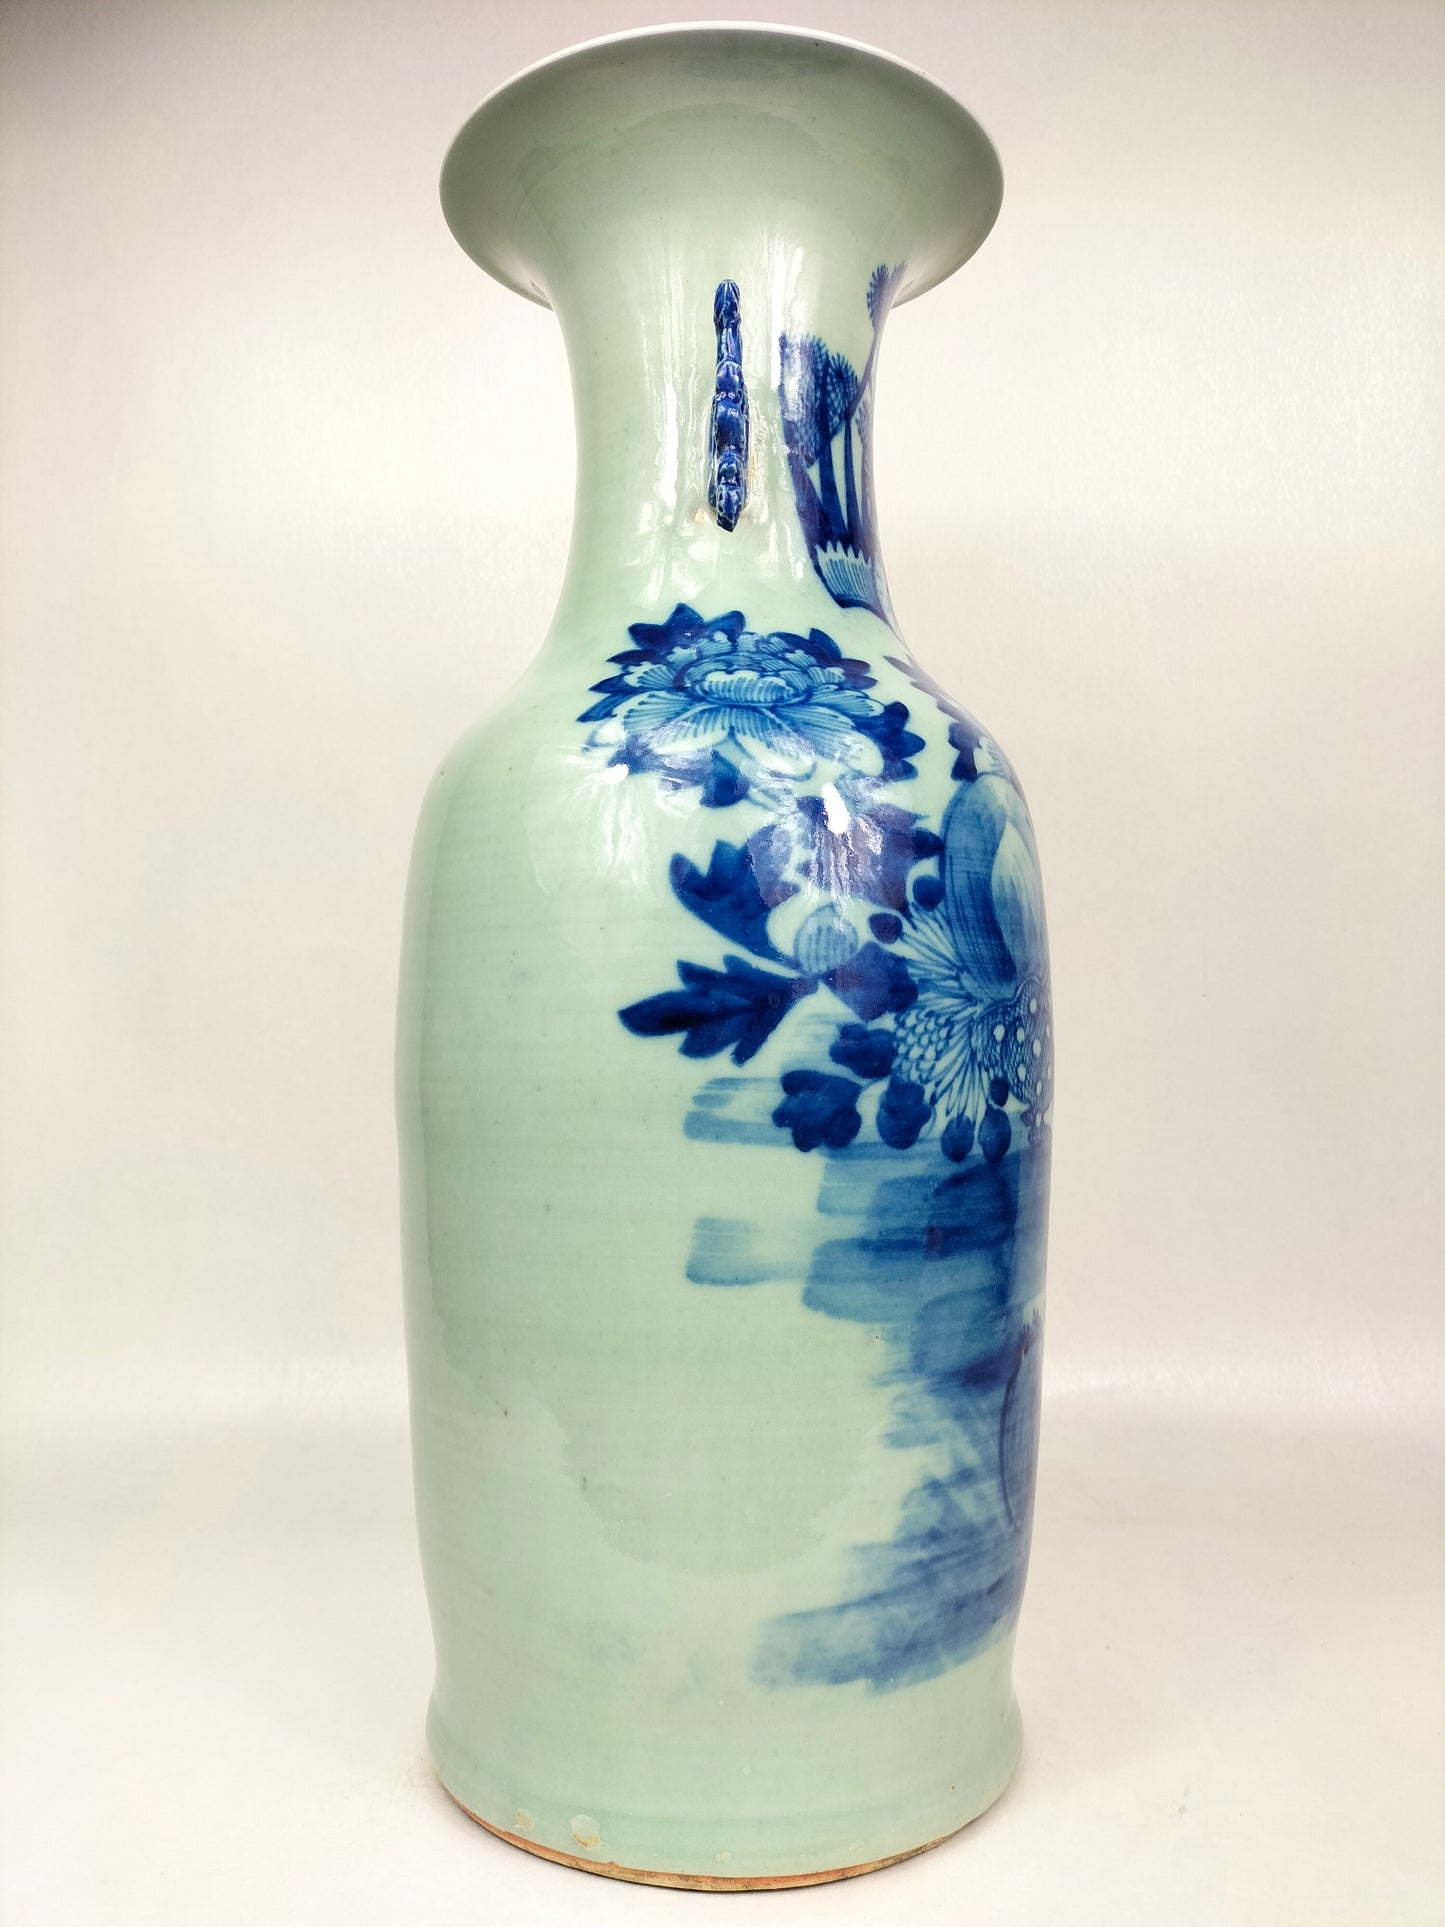 Large antique Chinese celadon vase decorated with deer and flowers // Qing Dynasty - 19th century